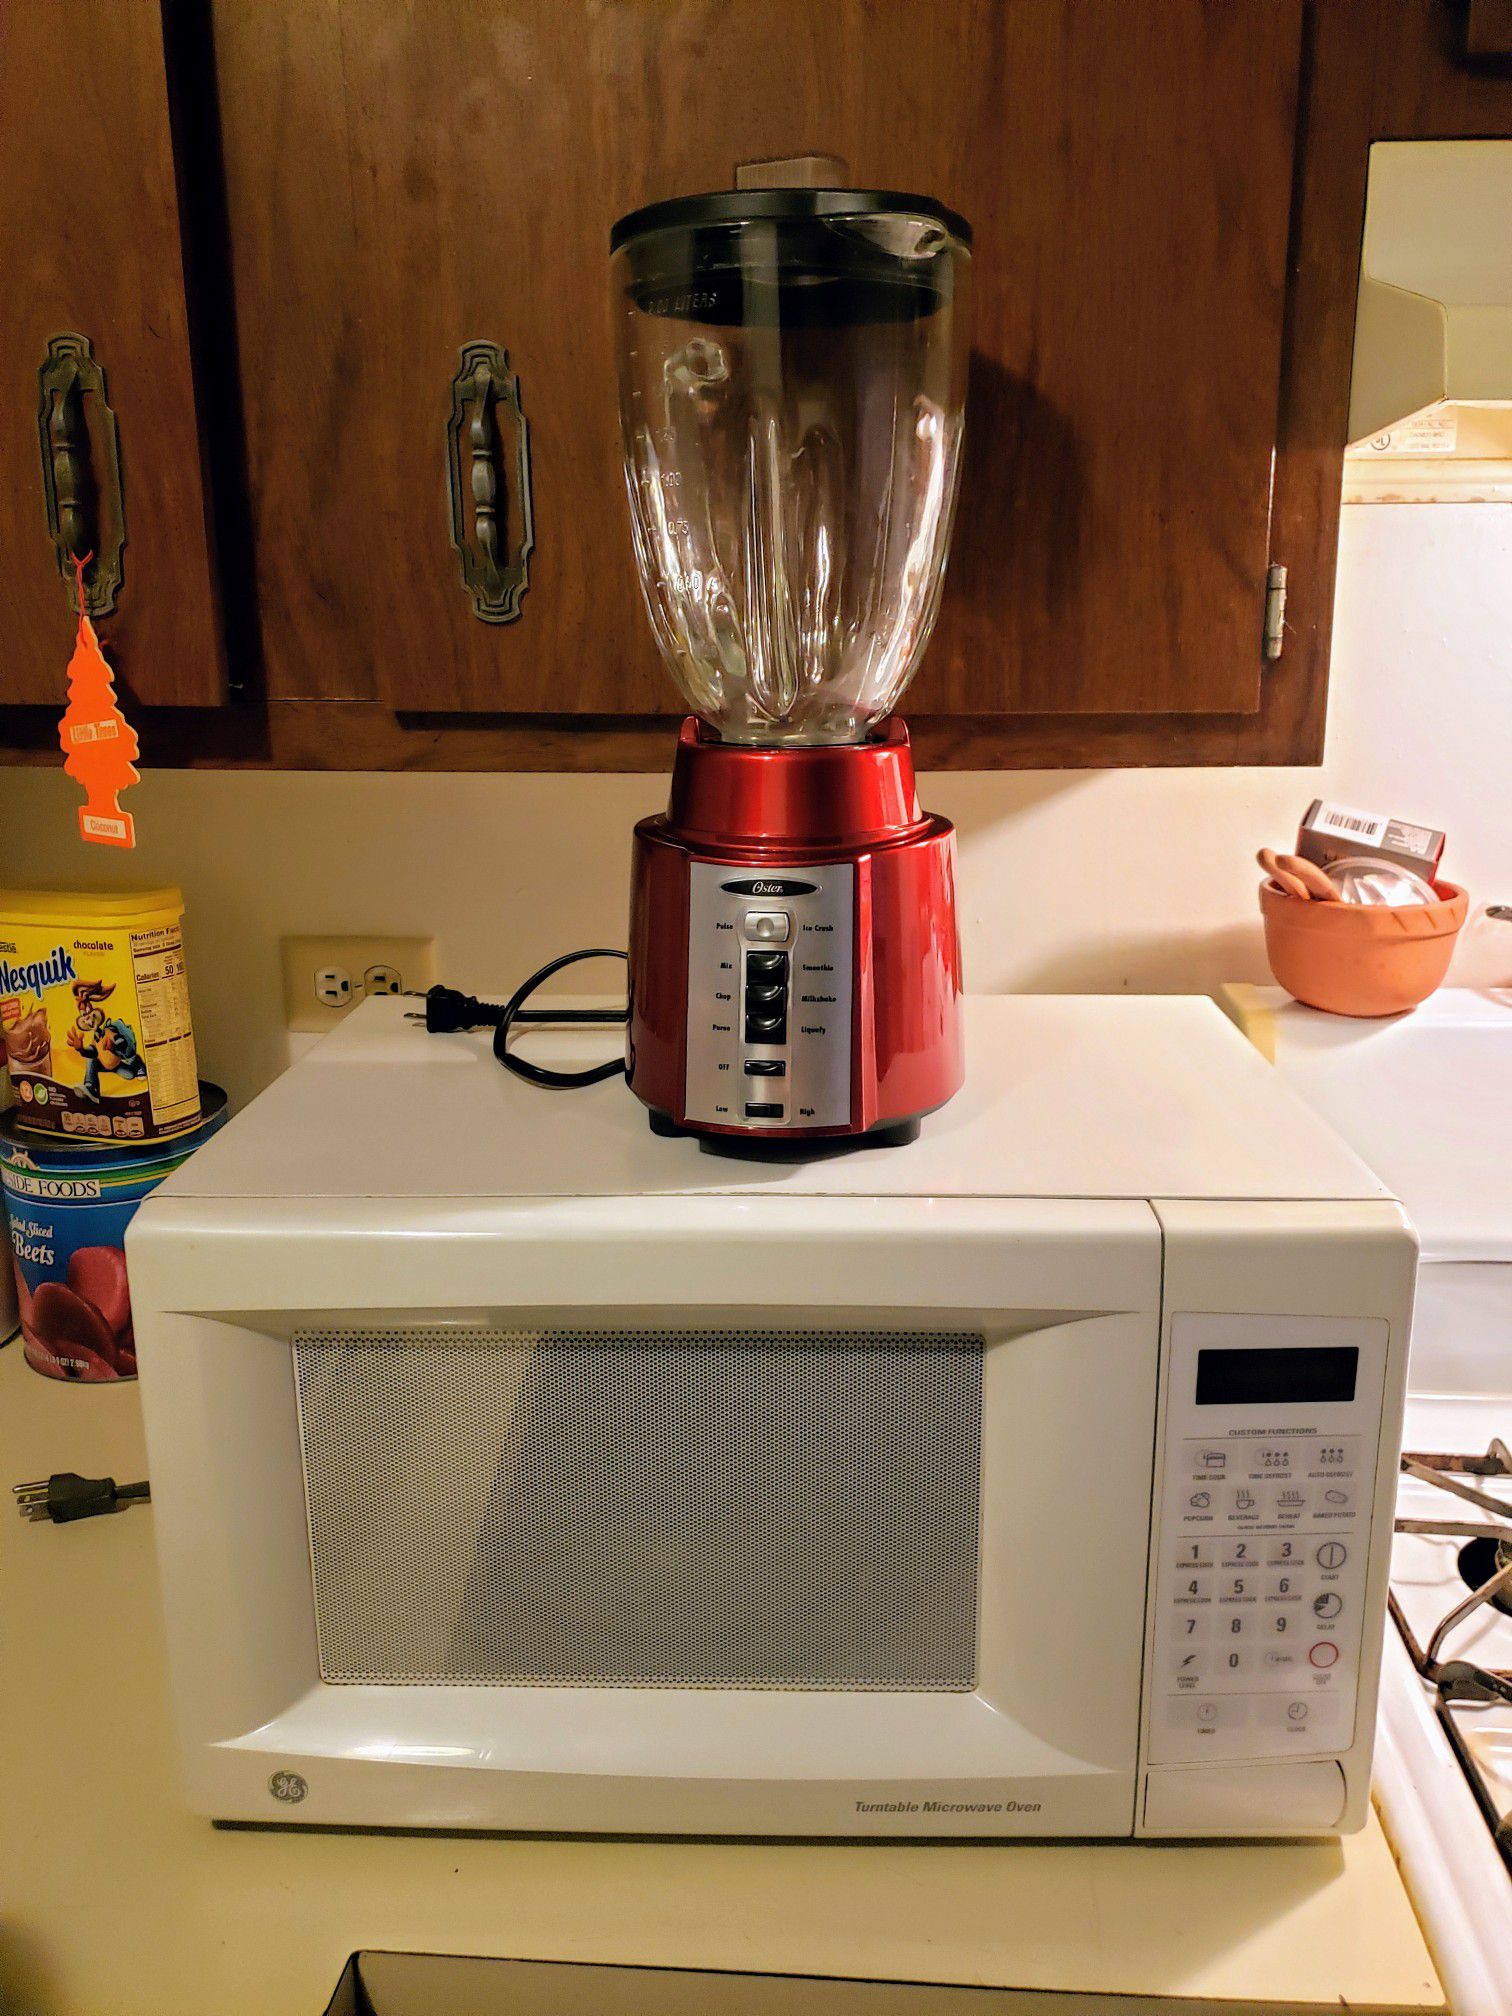 Blender and microwave